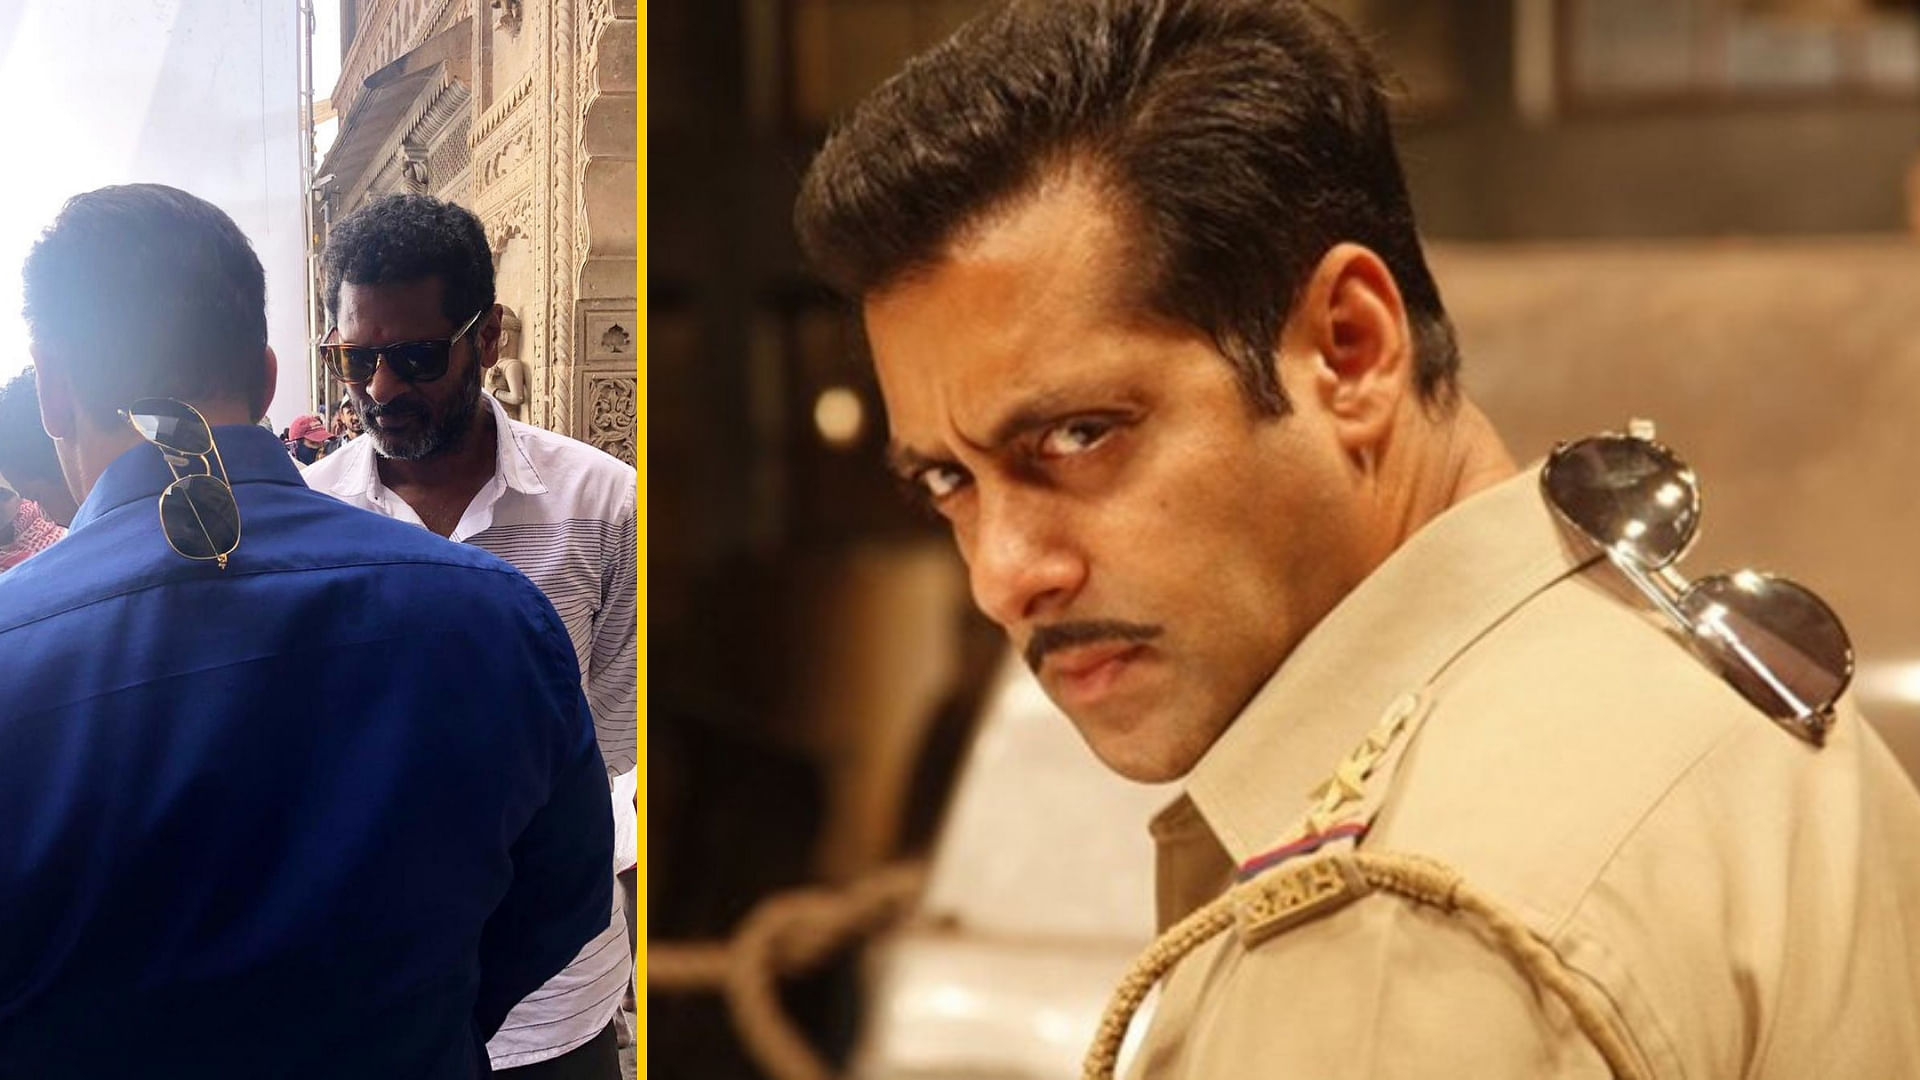 Salman Khan’s <i>Dabangg 3</i> has courted controversy while filming on location in Madhya Pradesh.